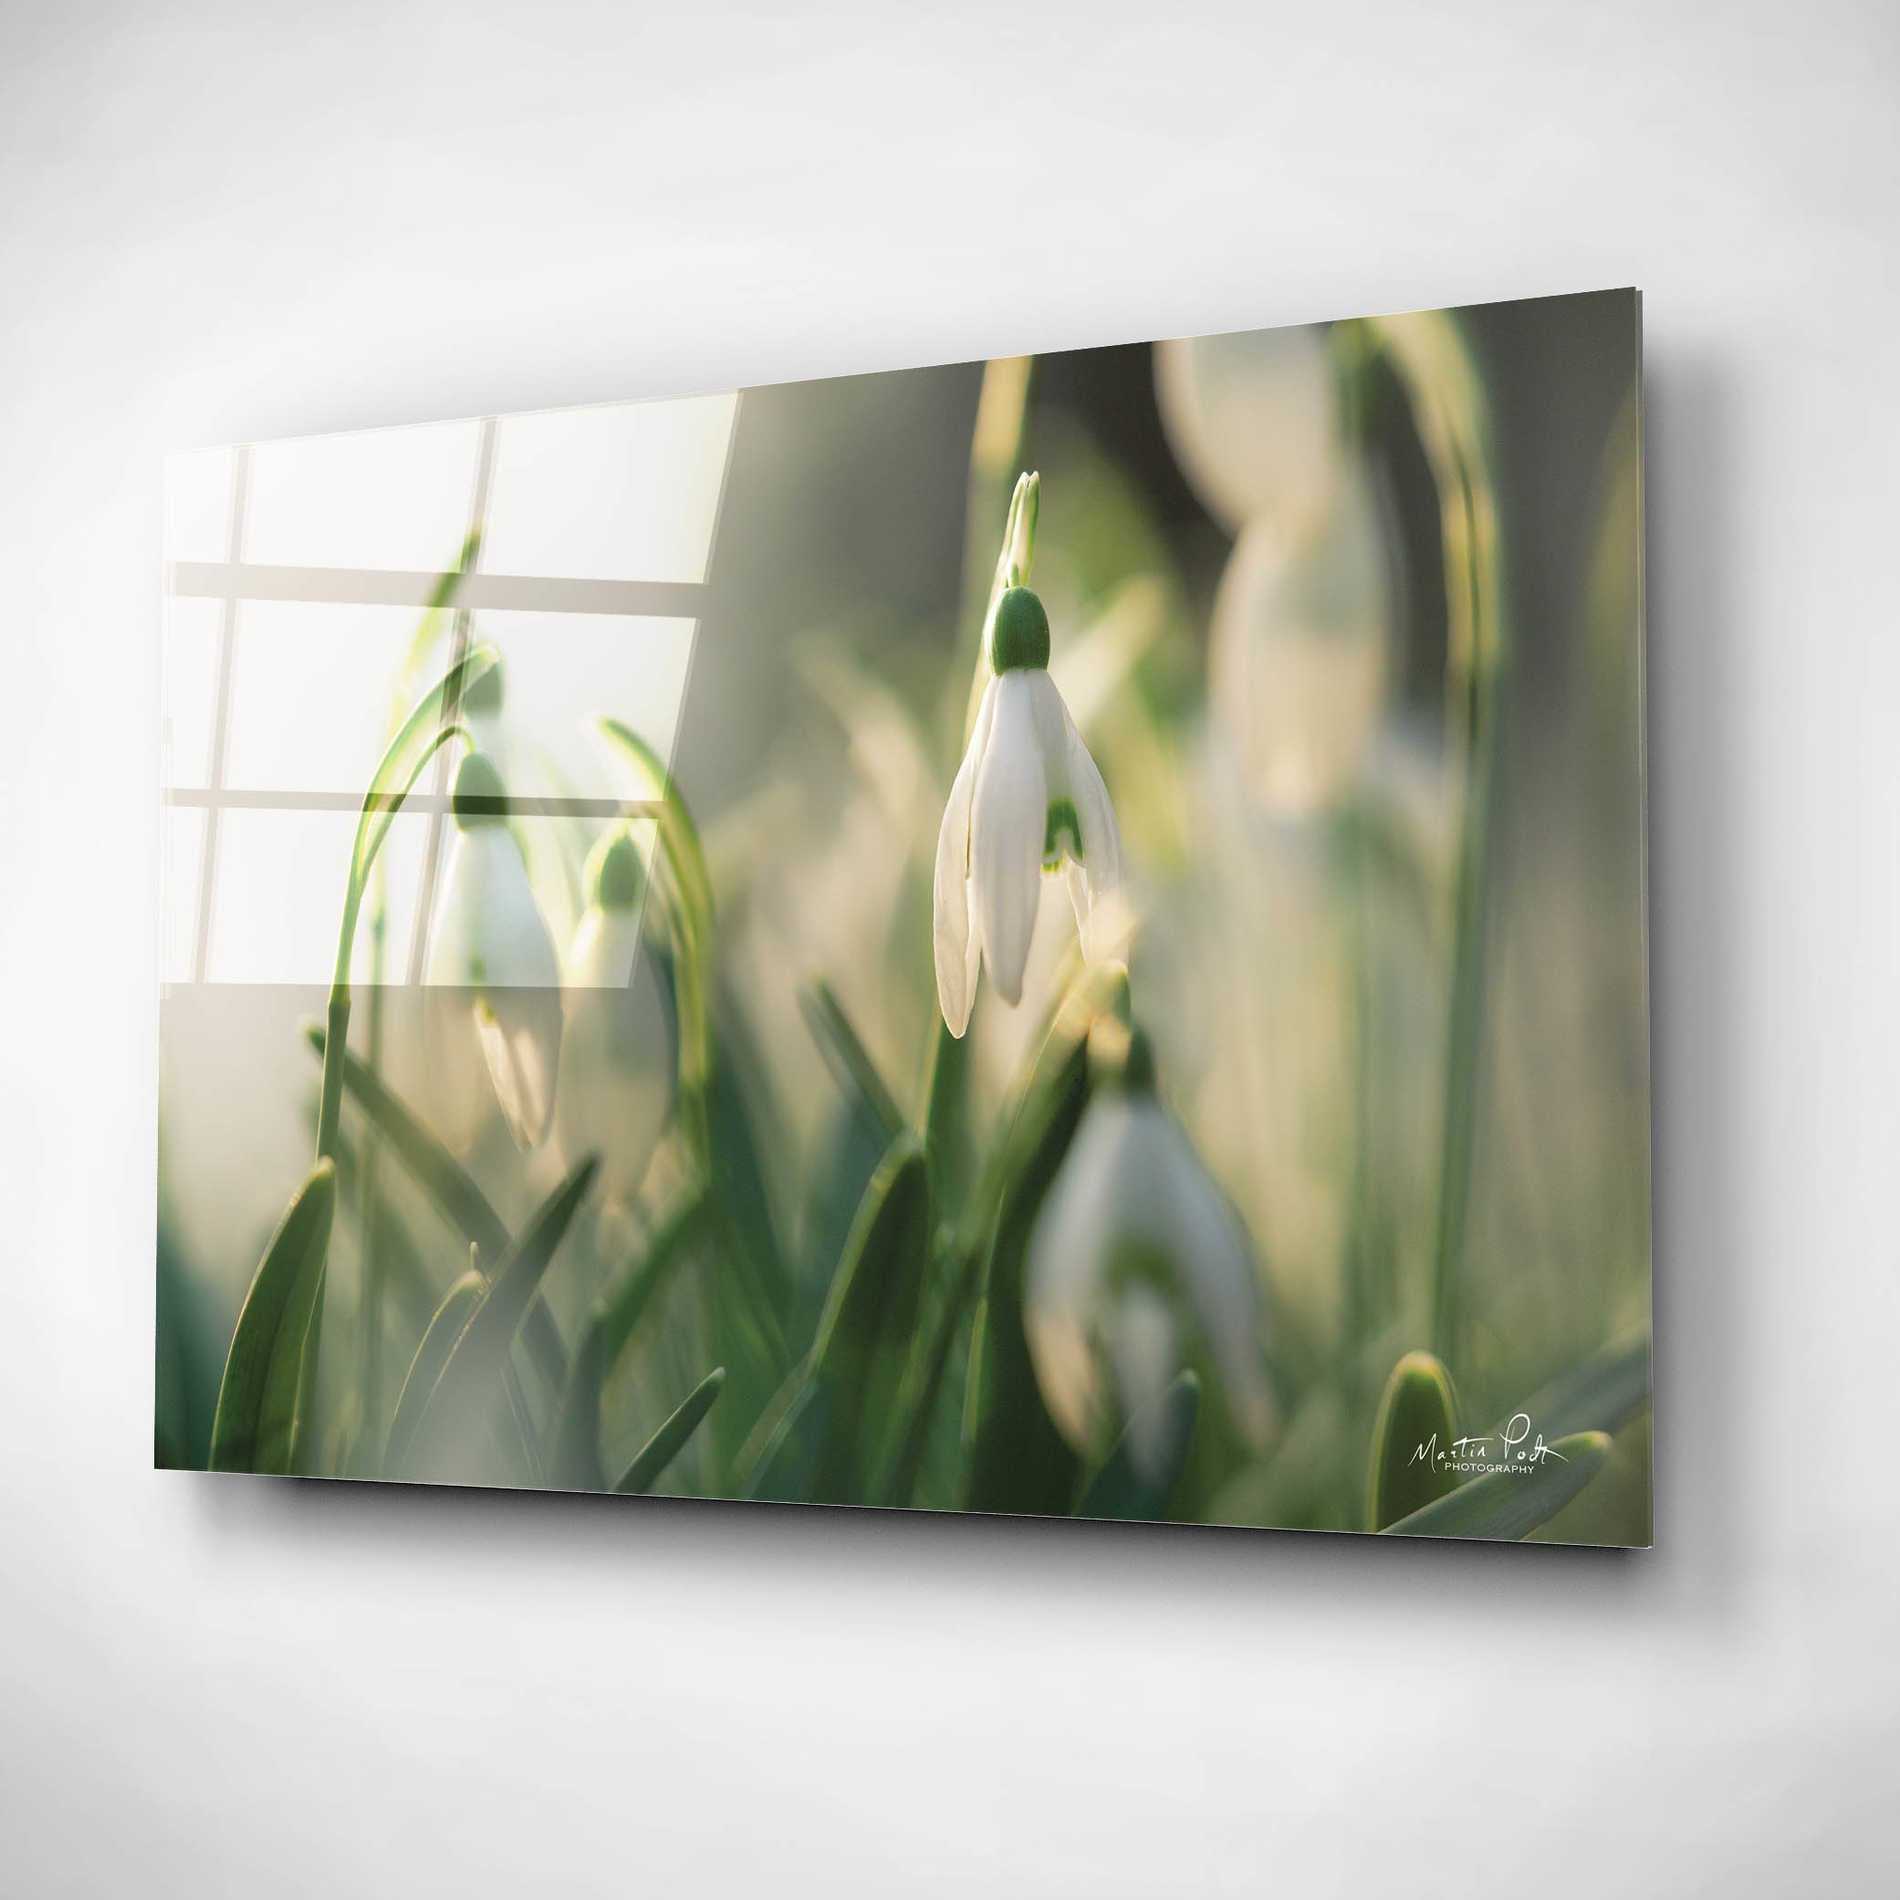 Epic Art 'Snowdrops' by Martin Podt, Acrylic Glass Wall Art,16x12